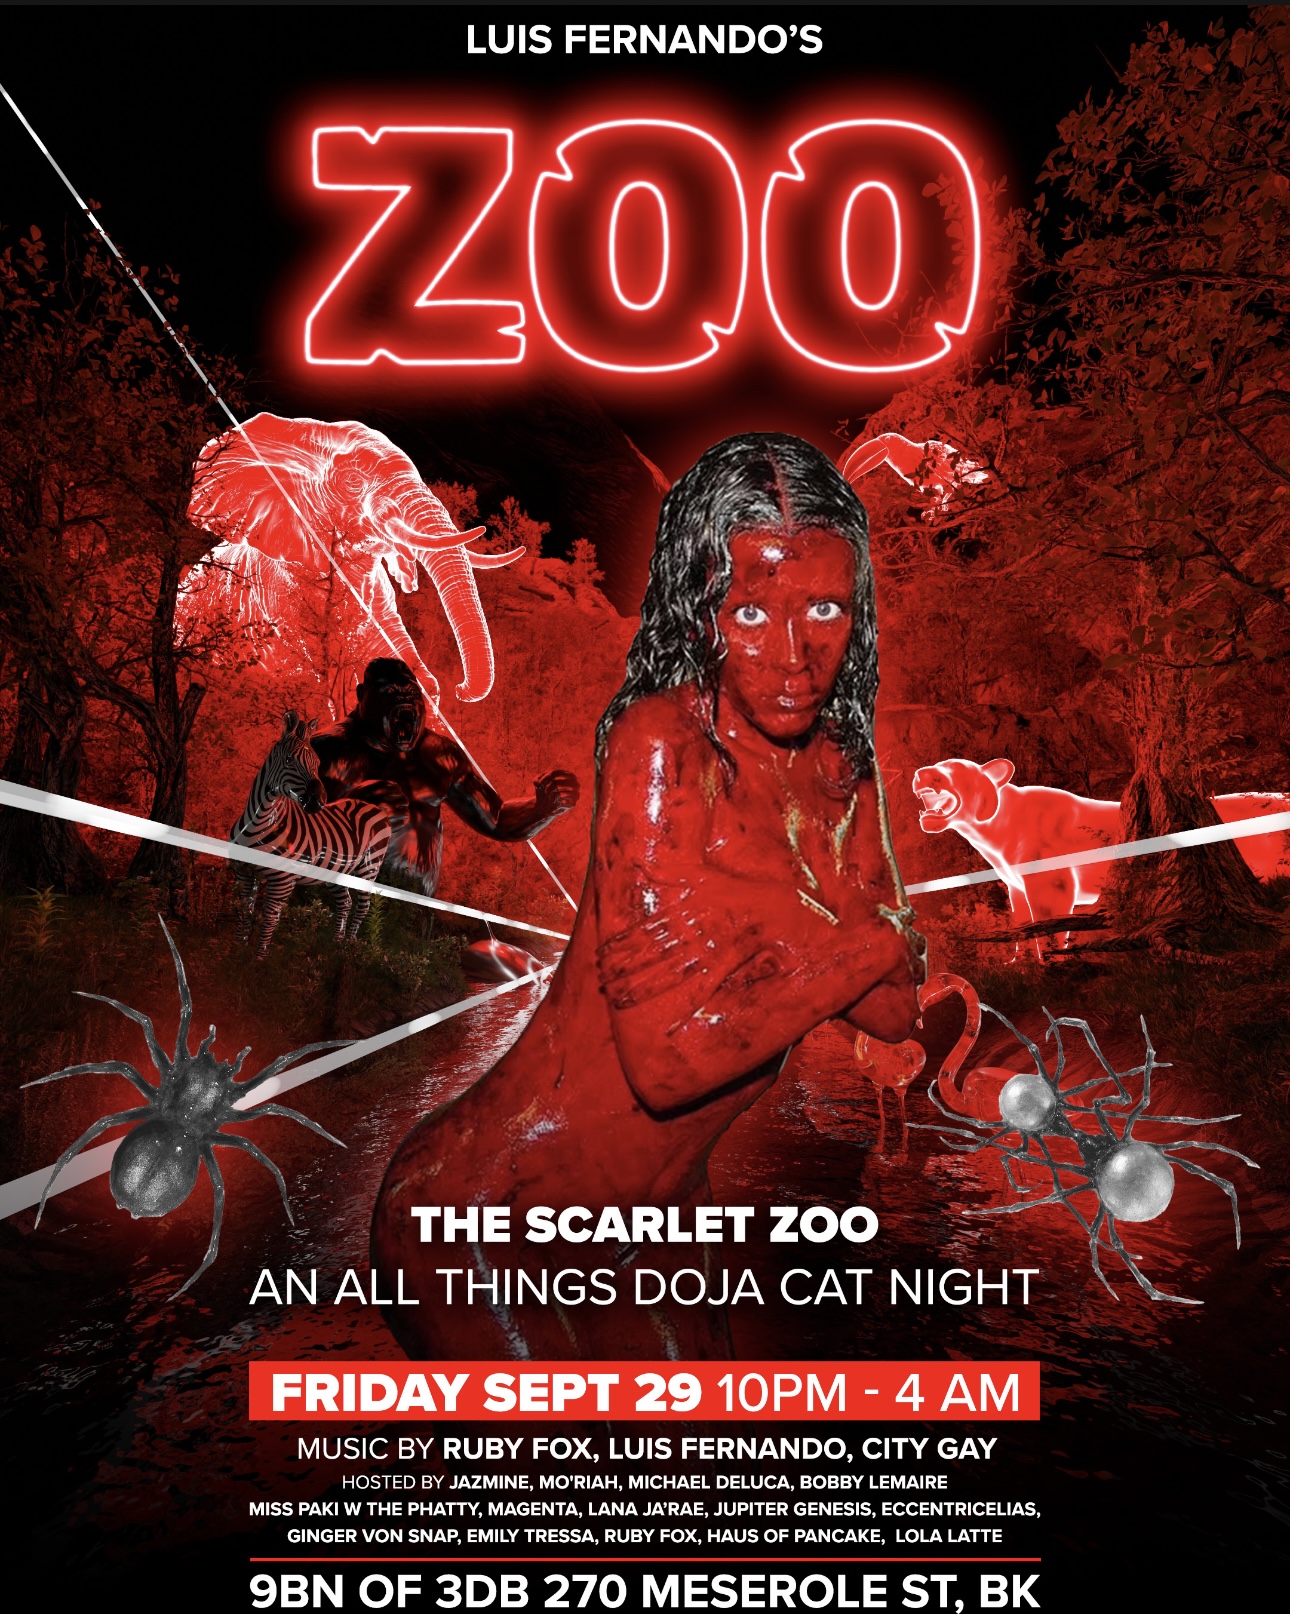 Buy Tickets to THE SCARLET ZOO: AN ALL THINGS DOJA CAT NIGHT! in 